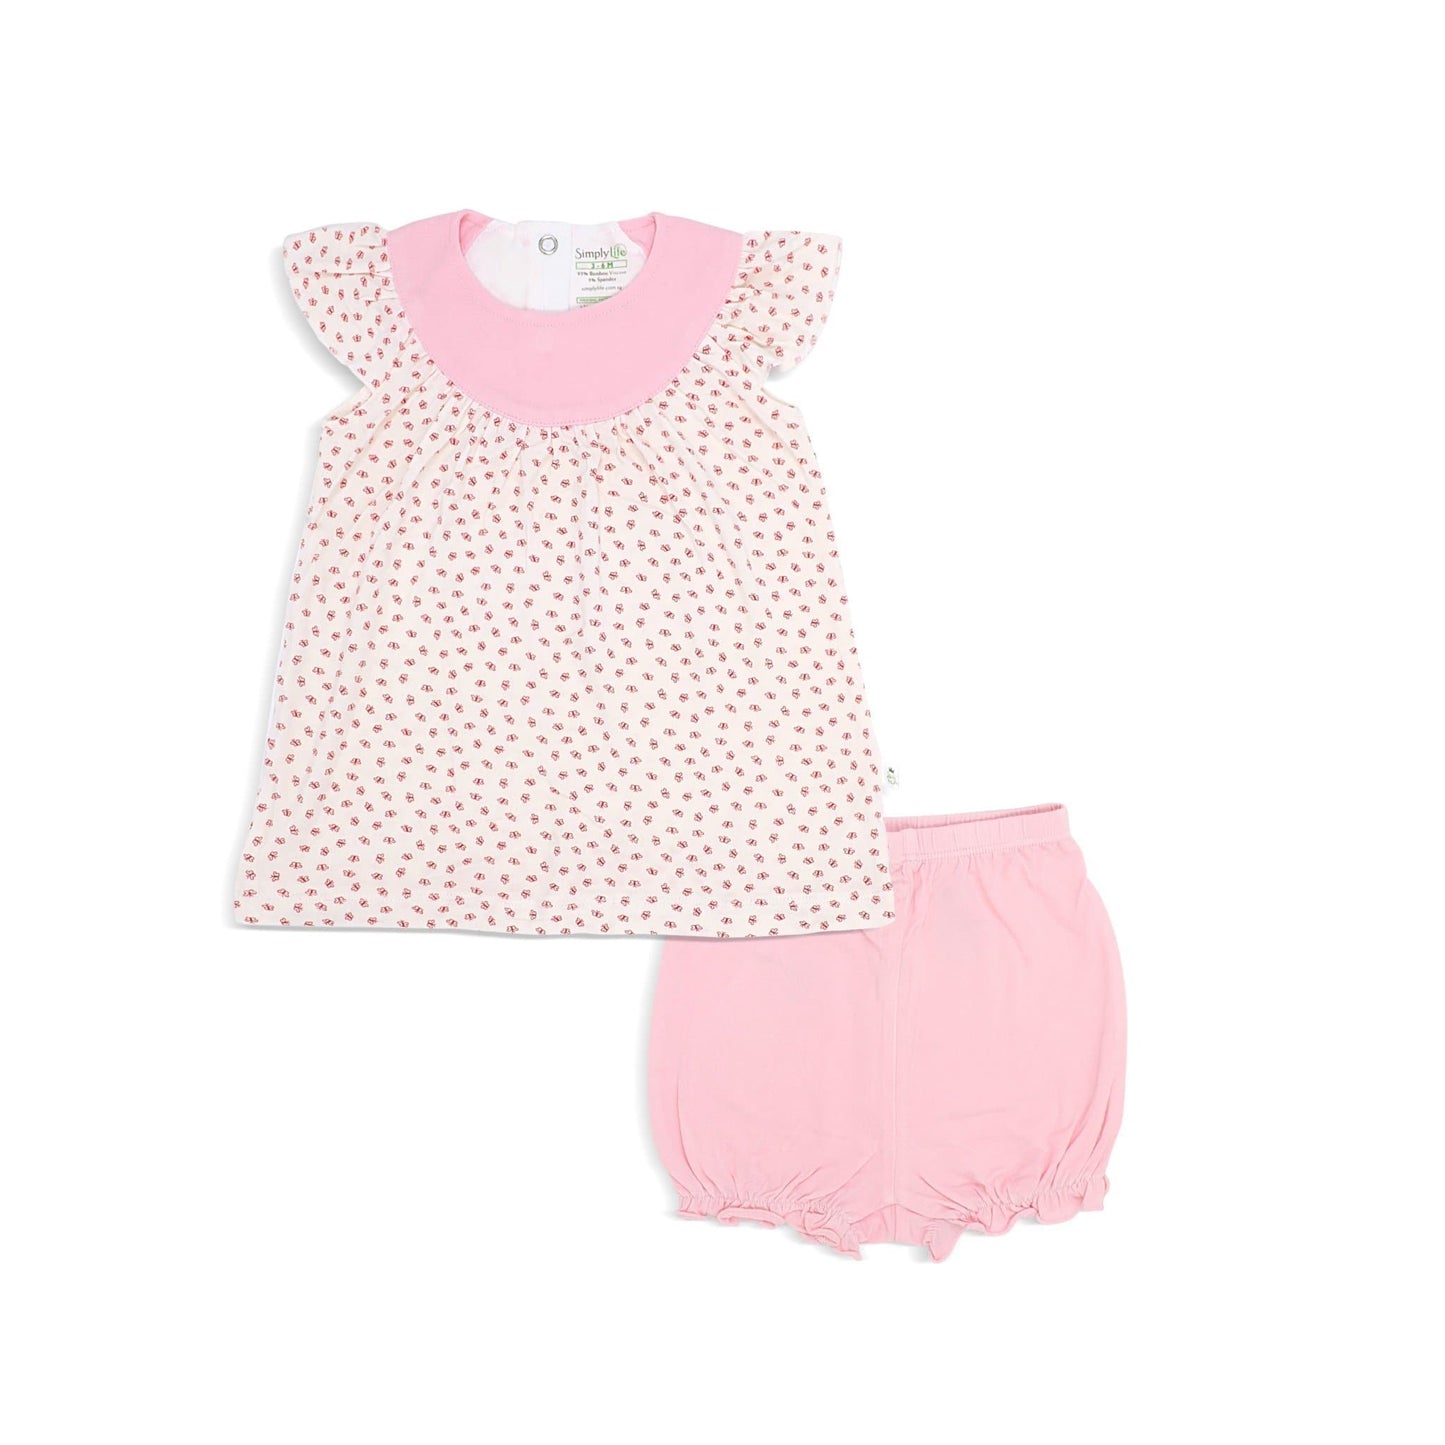 Lovely Butterflies - Blouse with Cap-sleeves & Bloomer Shorts (2-pc Set) by simplylifebaby